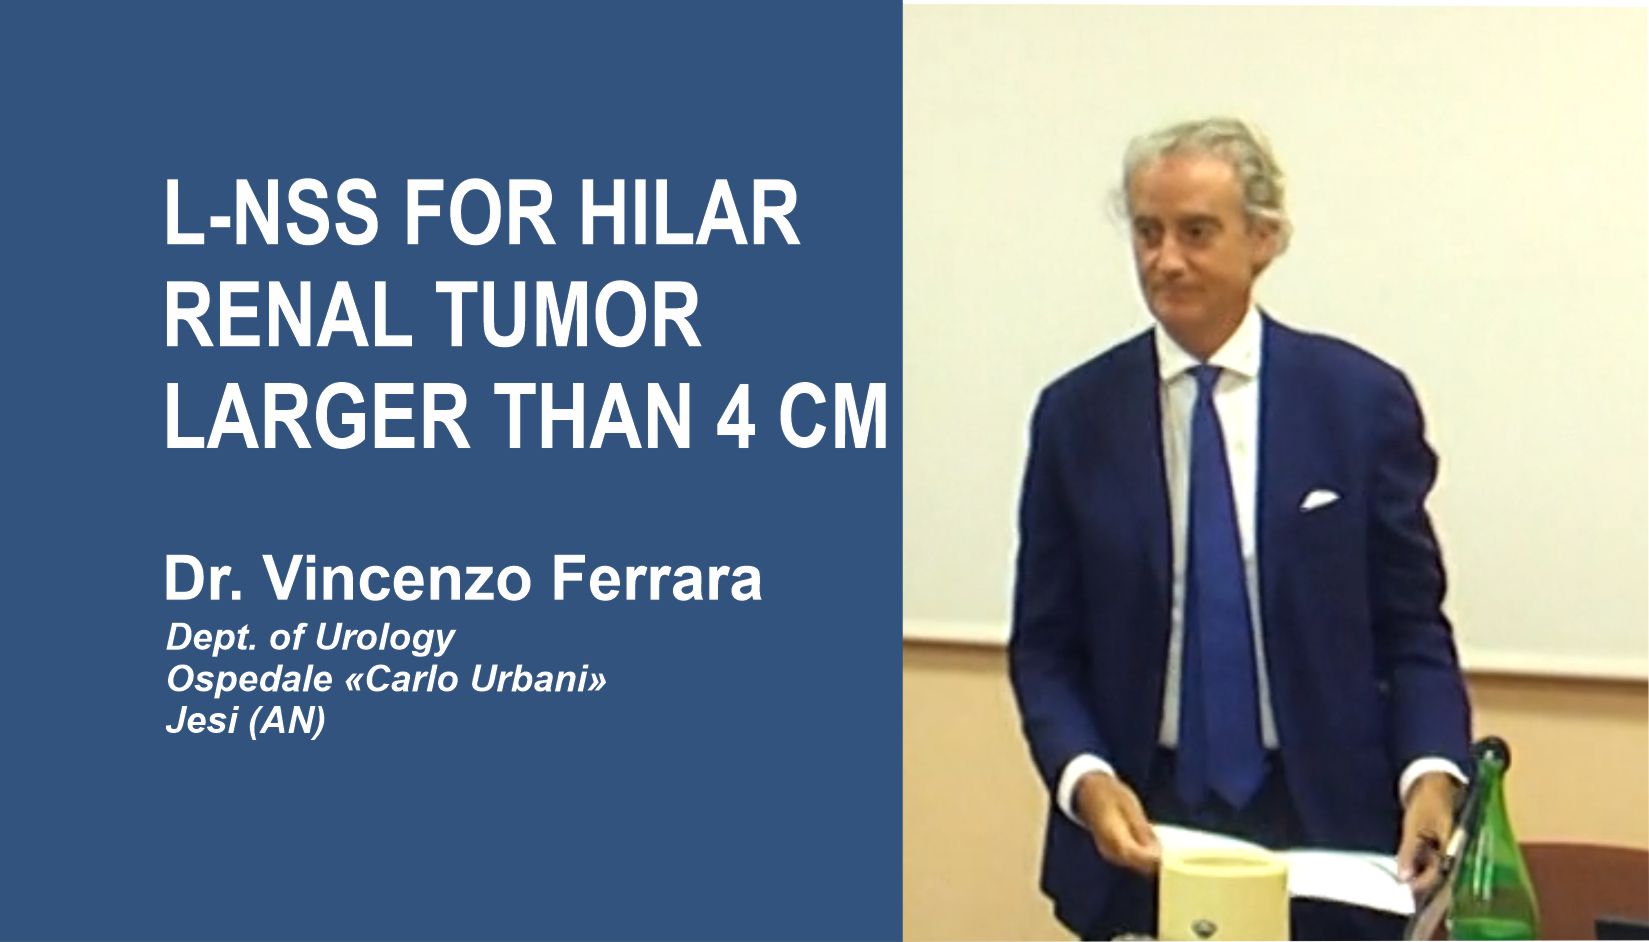 Introductory Image to "L-NSS for Hilar Renal Tumor larger than 4 cm"